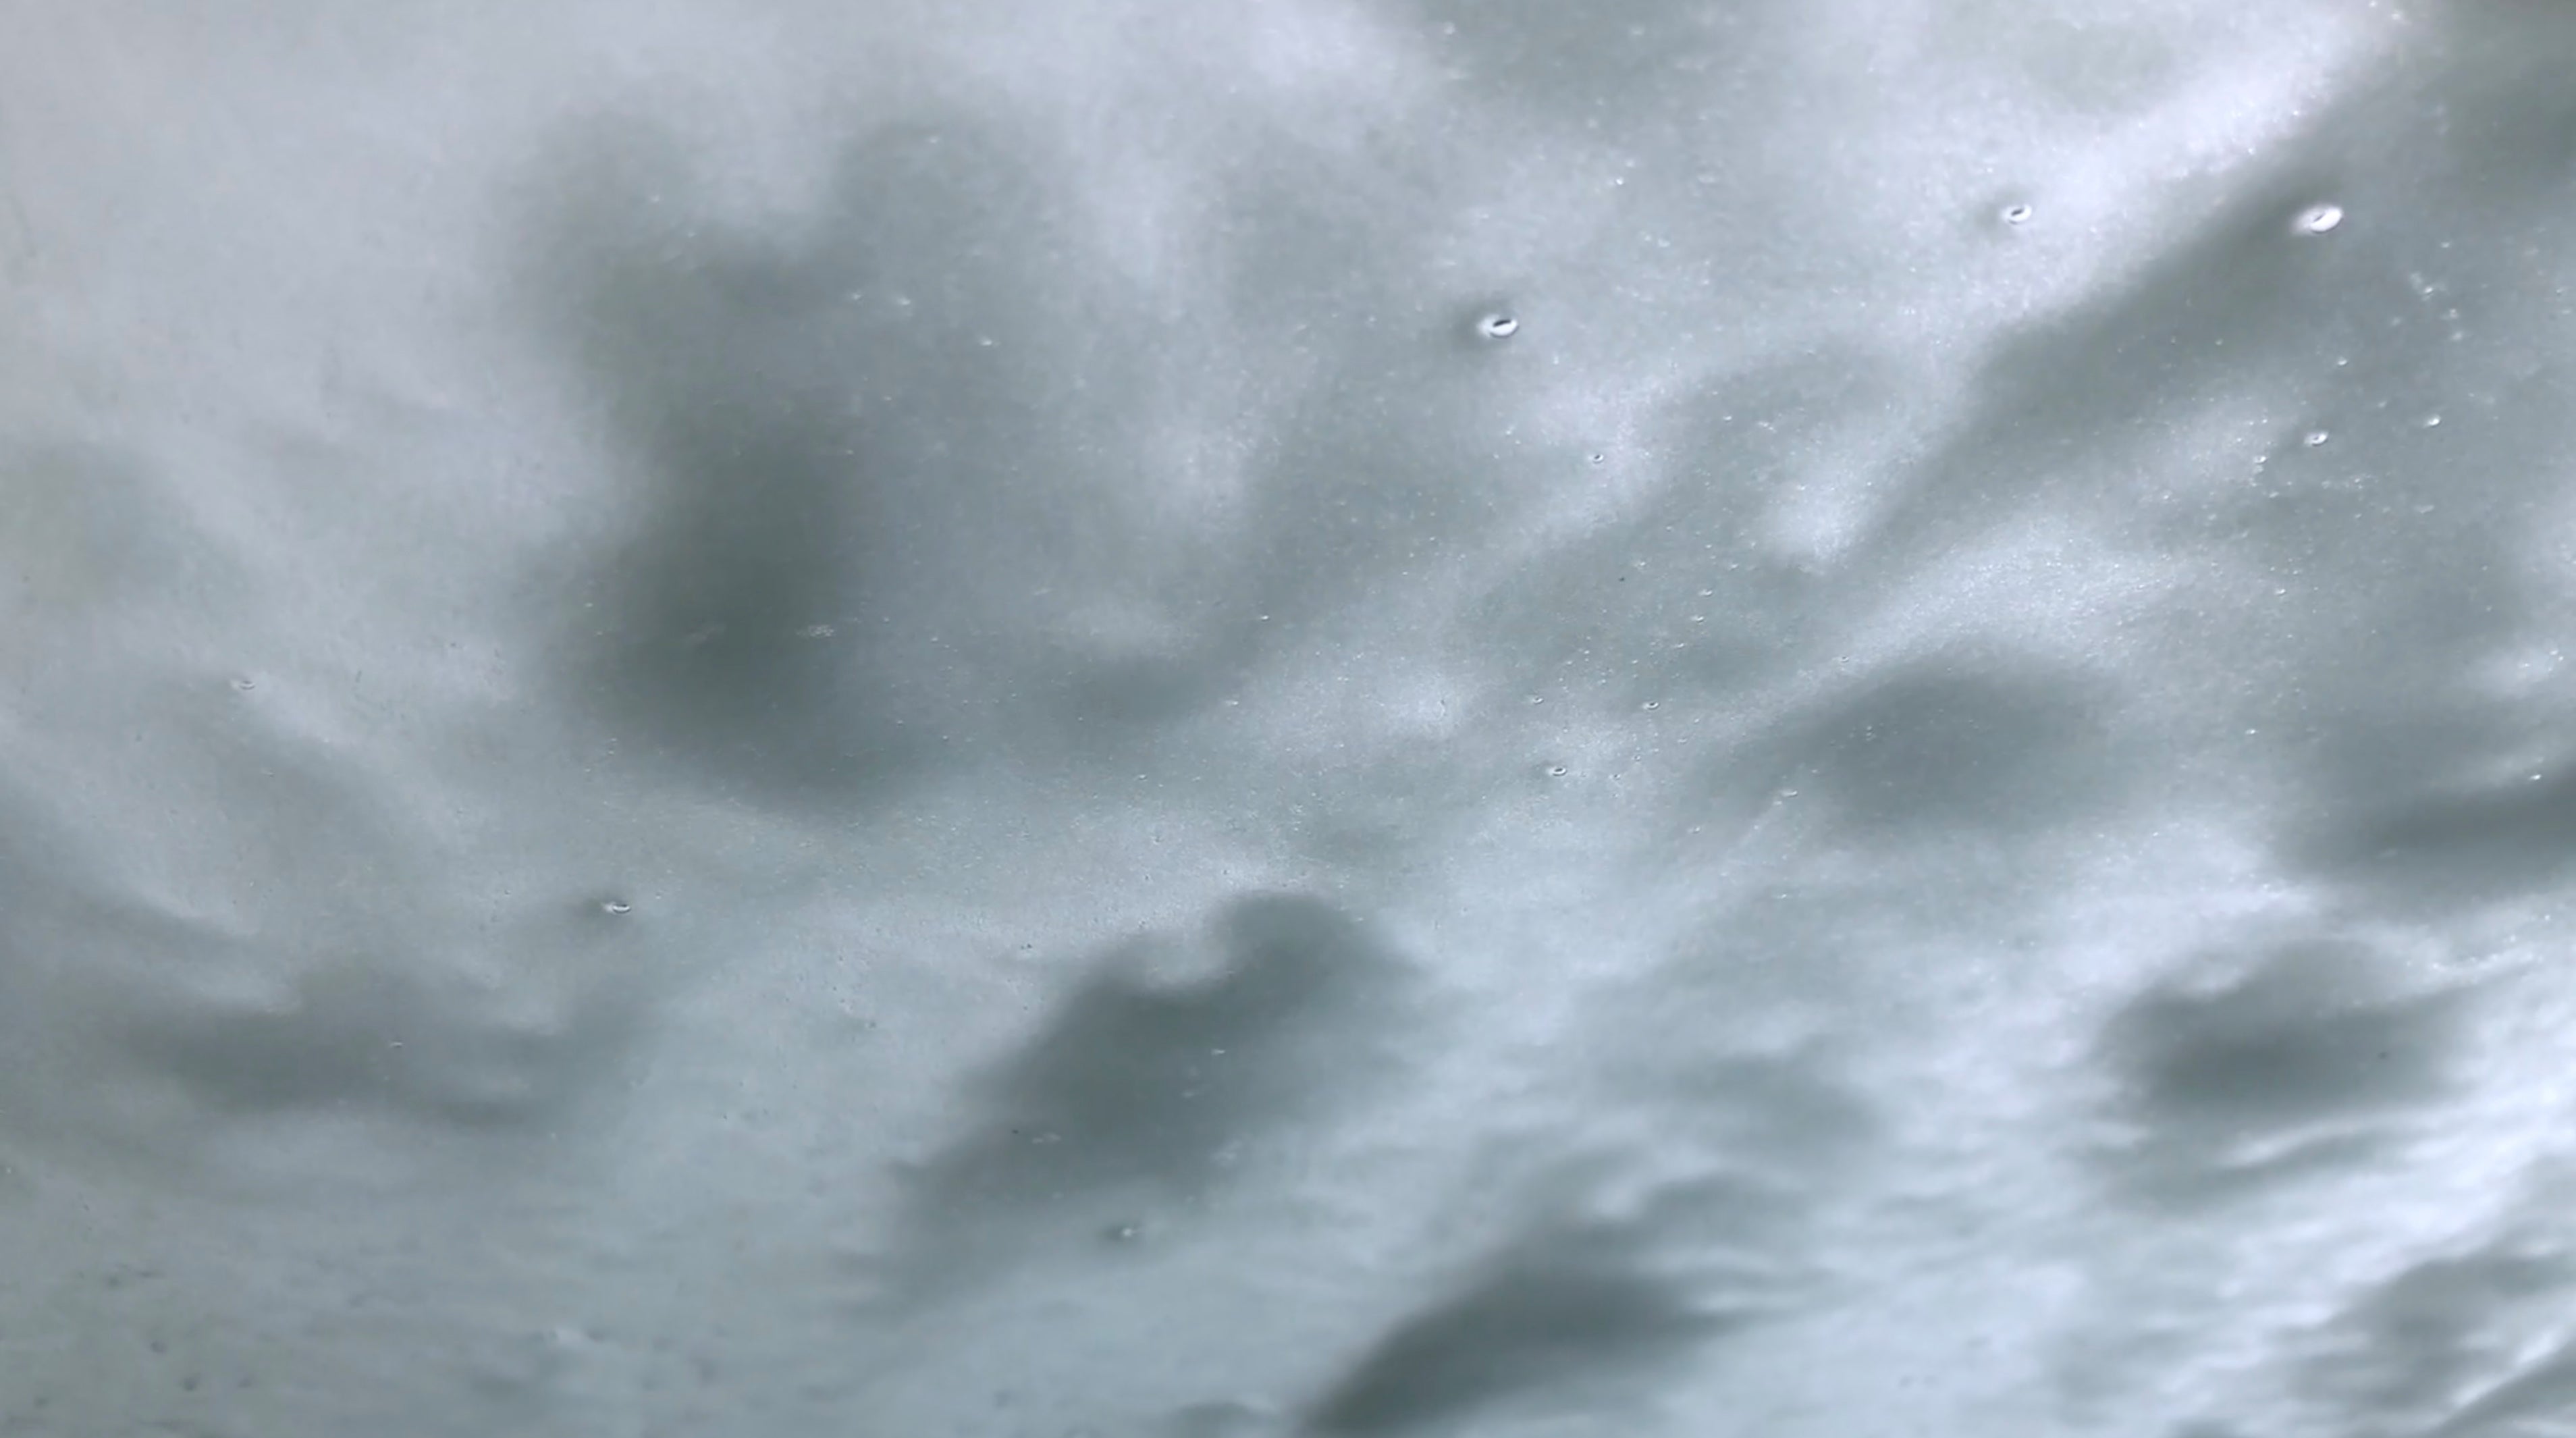 Load video: &quot;Sudden Storm&quot; is a short film by Shawn Saumell.